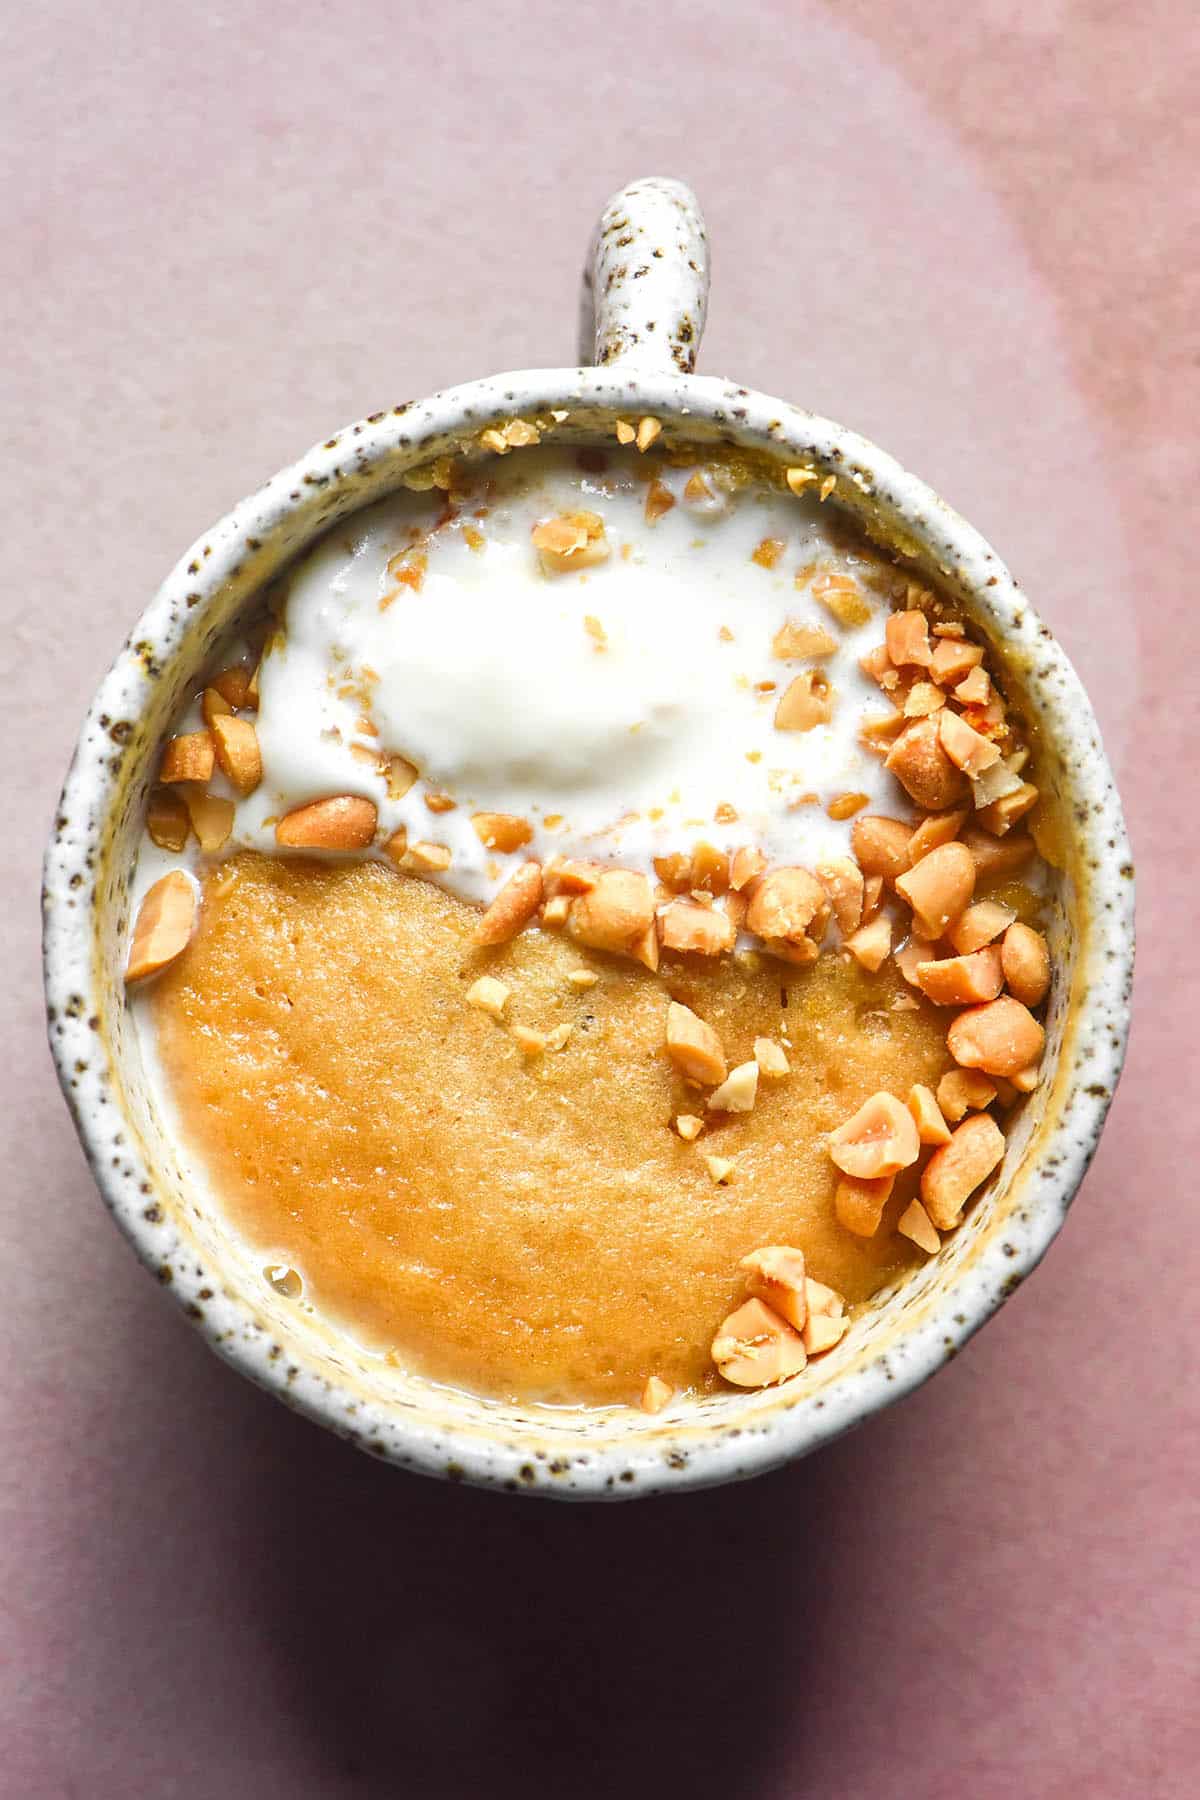 An aerial image of a gluten free peanut butter mug cake topped with chopped peanuts and vanilla ice cream on a pale pink ceramic plate